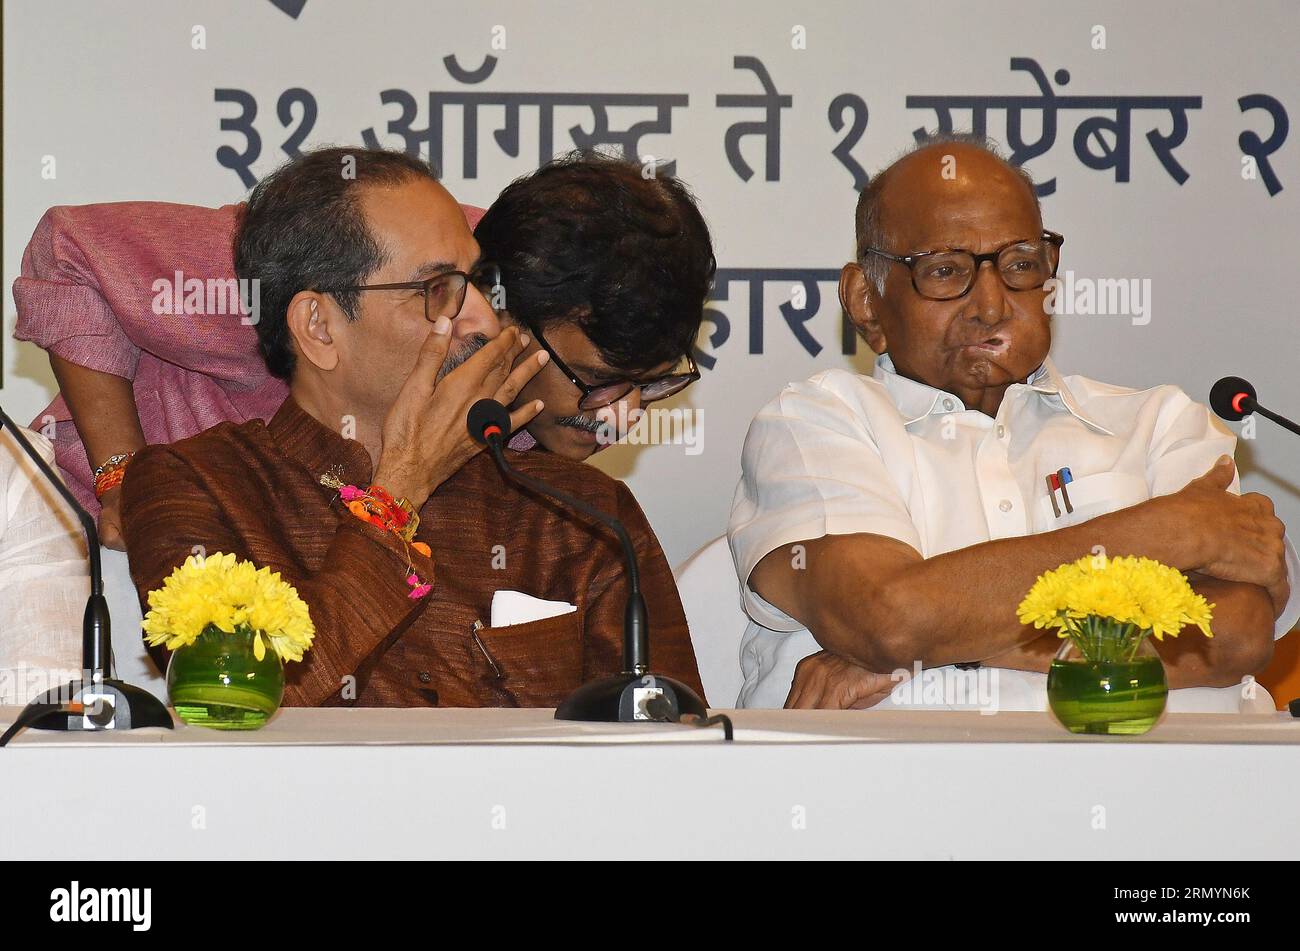 Mumbai, India. 30th Aug, 2023. L-R Shiv Sena (UBT) chief Uddhav Thackeray speaks to Member of Parliament (MP) Sanjay Raut as Nationalist Congress Party (NCP) chief Sharad Govindrao Pawar looks on during the Maha Vikas Aghadi (MVA) press conference in Mumbai. The press conference was held ahead of Indian National Developmental Inclusive Alliance (INDIA) third meeting to be held on 31st August and 1st September 2023. (Photo by Ashish Vaishnav/SOPA Images/Sipa USA) Credit: Sipa USA/Alamy Live News Stock Photo